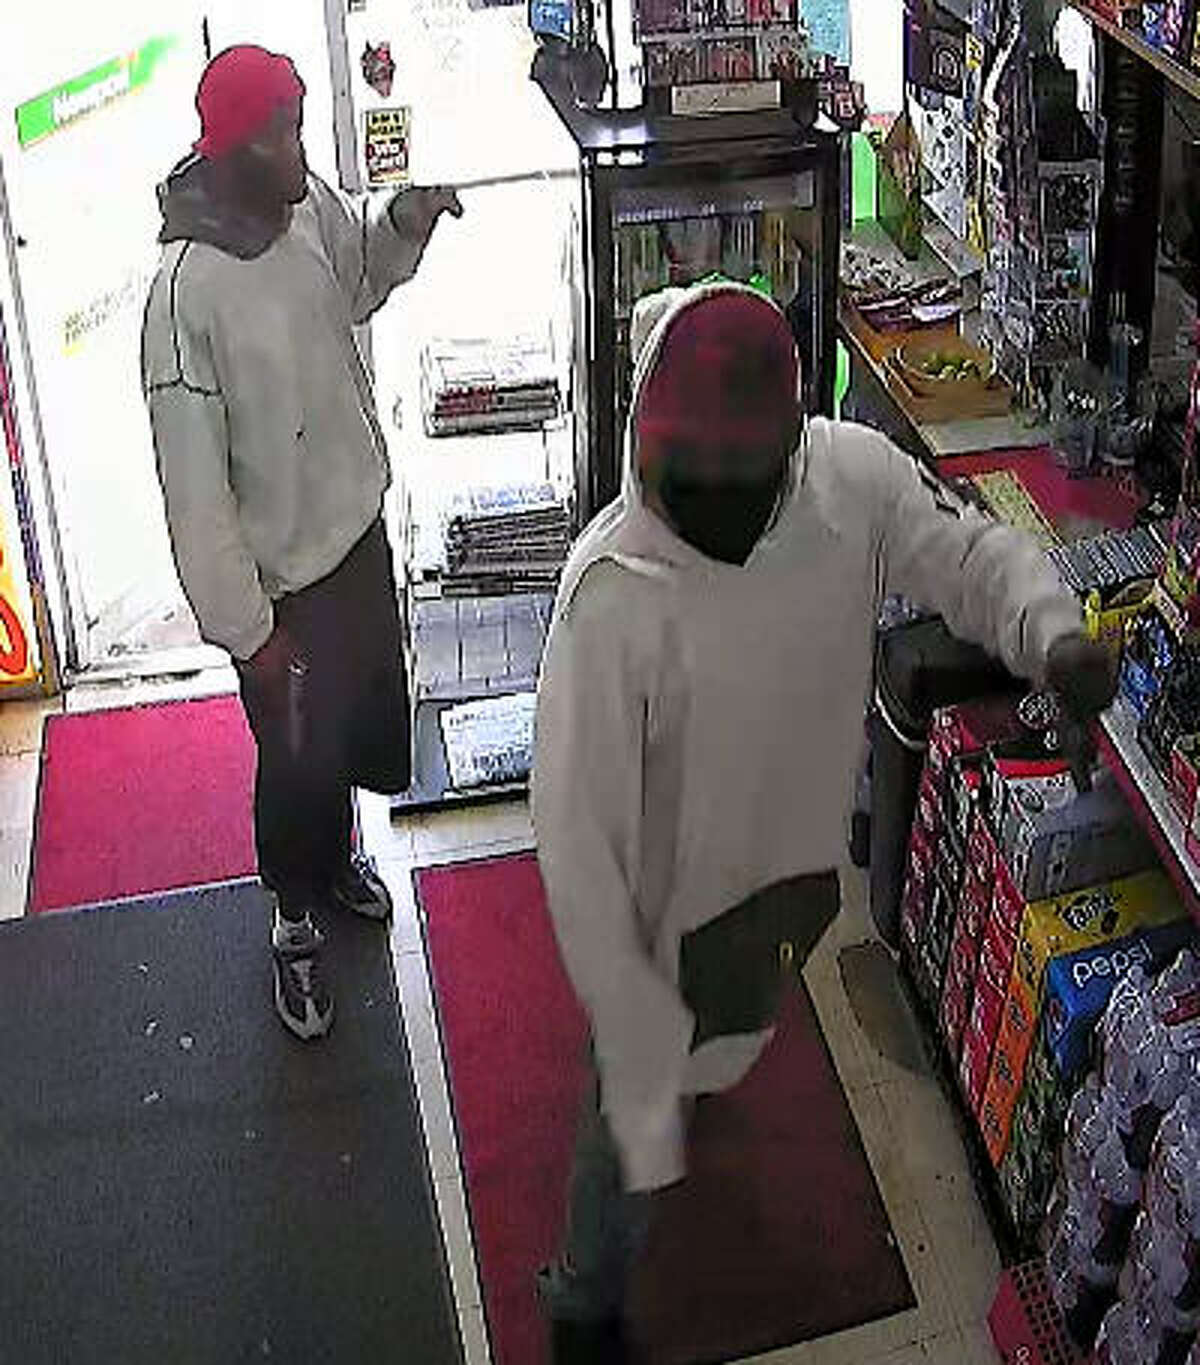 Police described the two robbers who stormed into a Baytown store and shot the clerk on April 9 as two black males, the first approximately 5’10, approximately 200 pounds, wearing a gray hoodie, baggy shorts and a red hat. The second suspect, also about 5’10”, weighing approximately 250 pounds, was wearing a white hoodie, dark shorts and a black mask covering his face, police said.